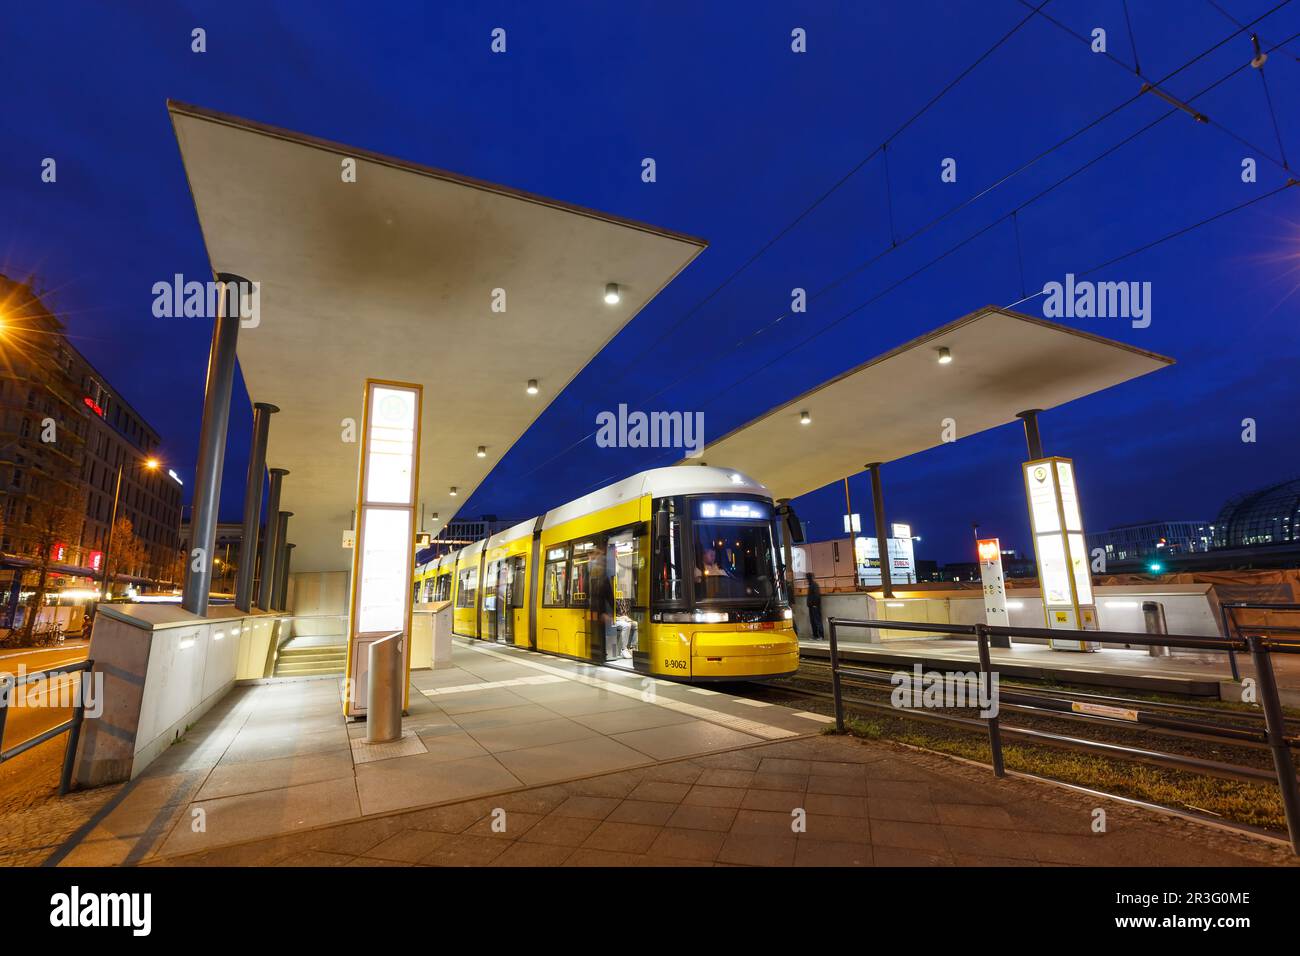 Tram Berlin Tram Bombardier Flexity train local traffic at the main station in Germany Stock Photo